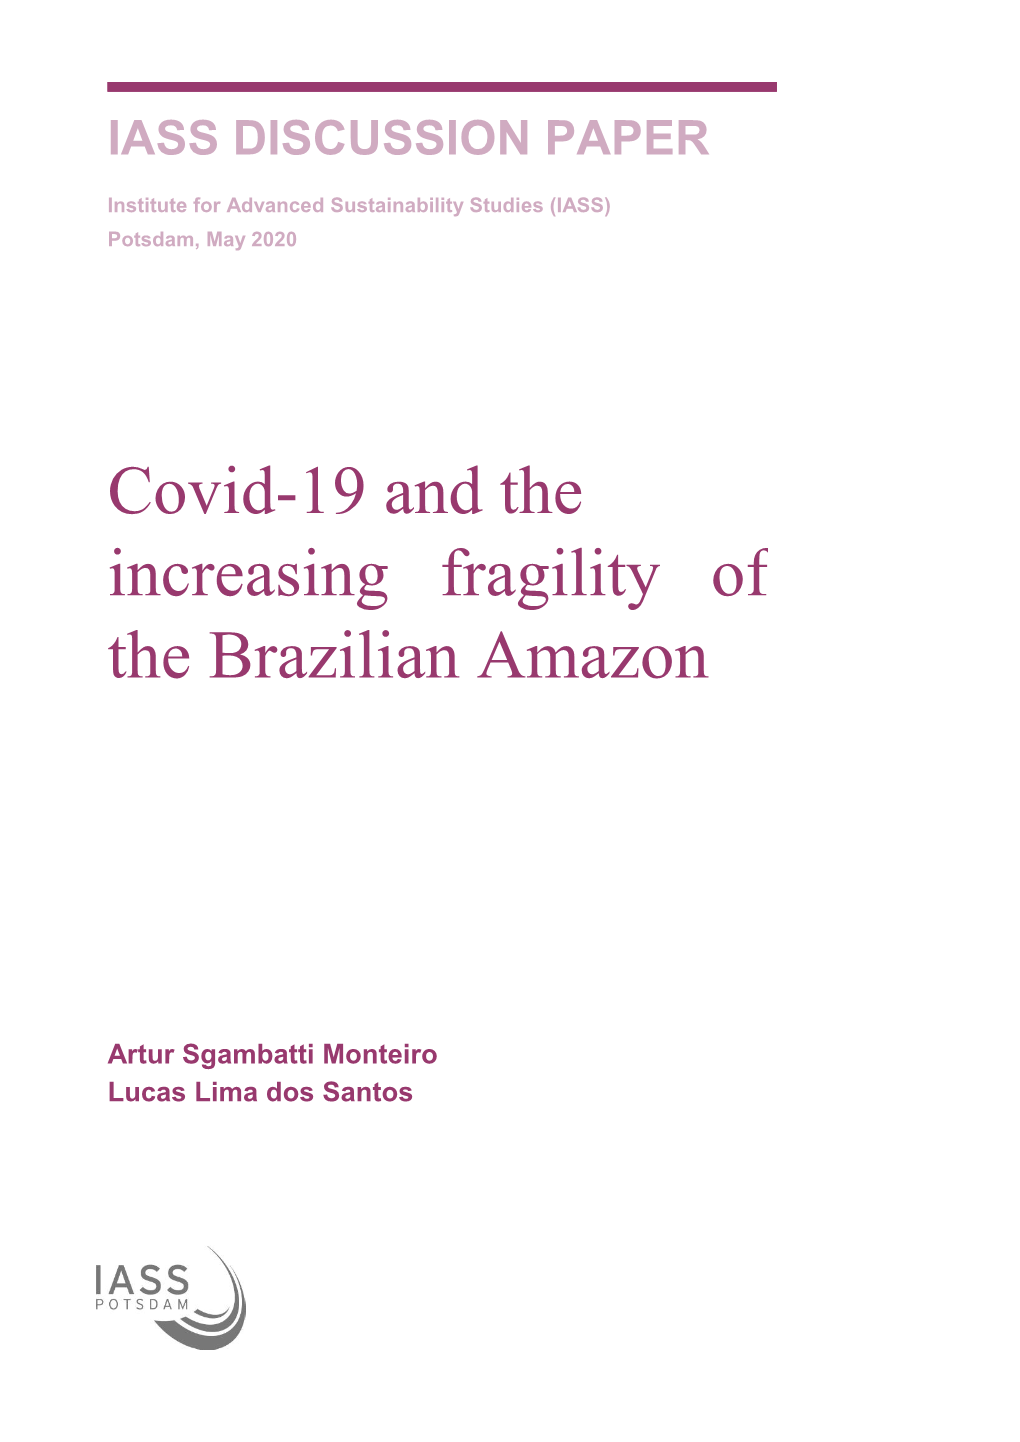 Covid-19 and the Increasing Fragility of the Brazilian Amazon